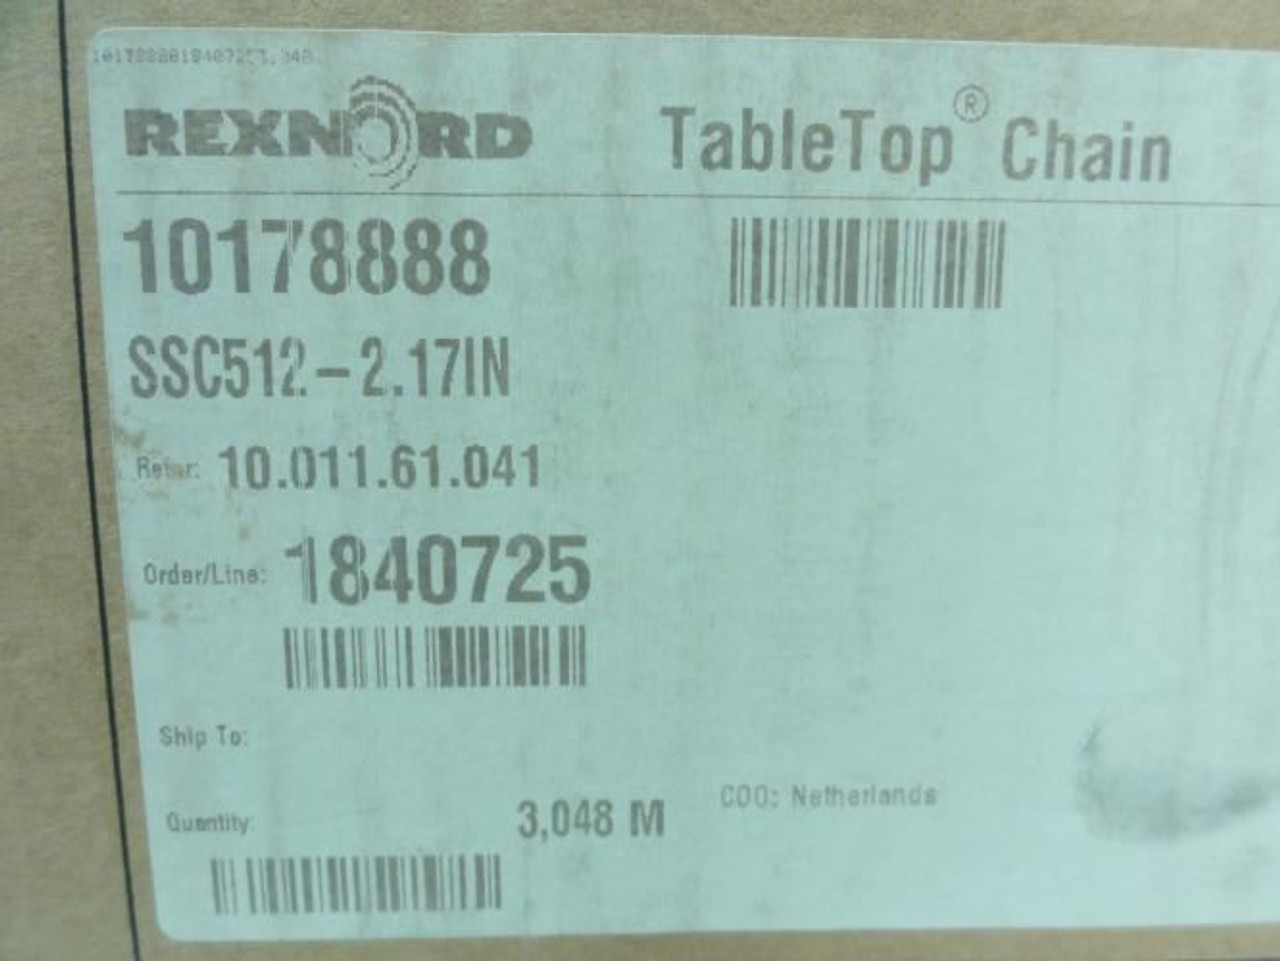 Rexnord 10178888; TableTop Chain; 2.17" Width; 10FT Length